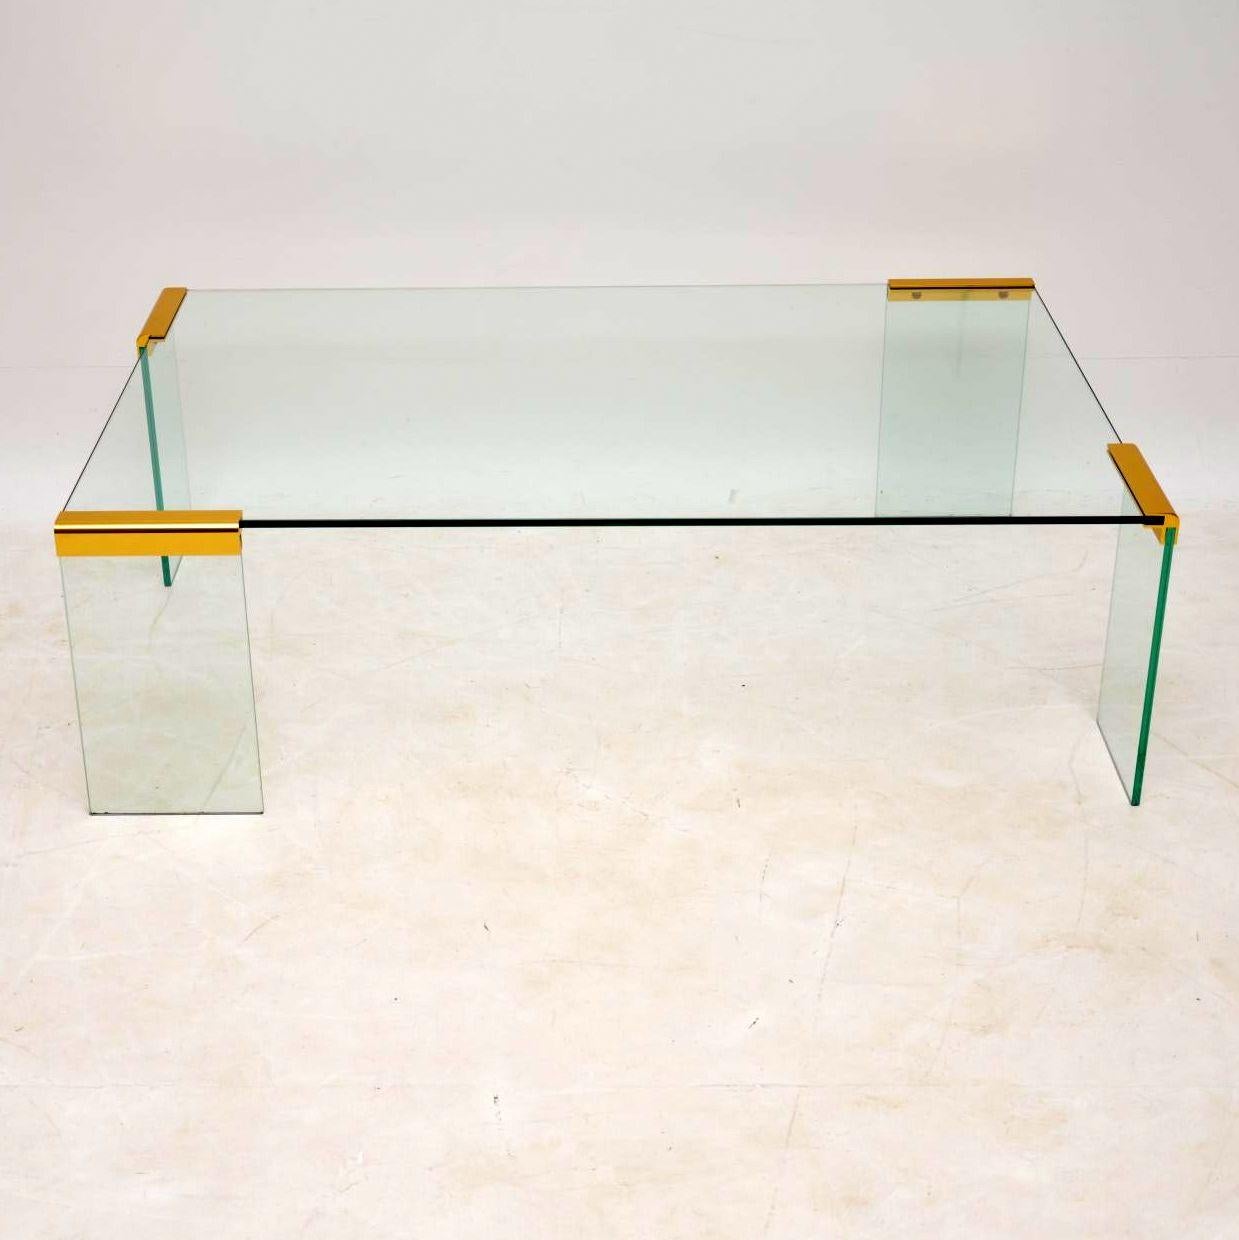 An absolutely stunning vintage coffee table from the 1970s, this was made in Italy by Gallotti & Radice. It’s of superb quality, it’s mostly made from clear toughened glass, held together by beautifully made brass fixtures. The condition is superb